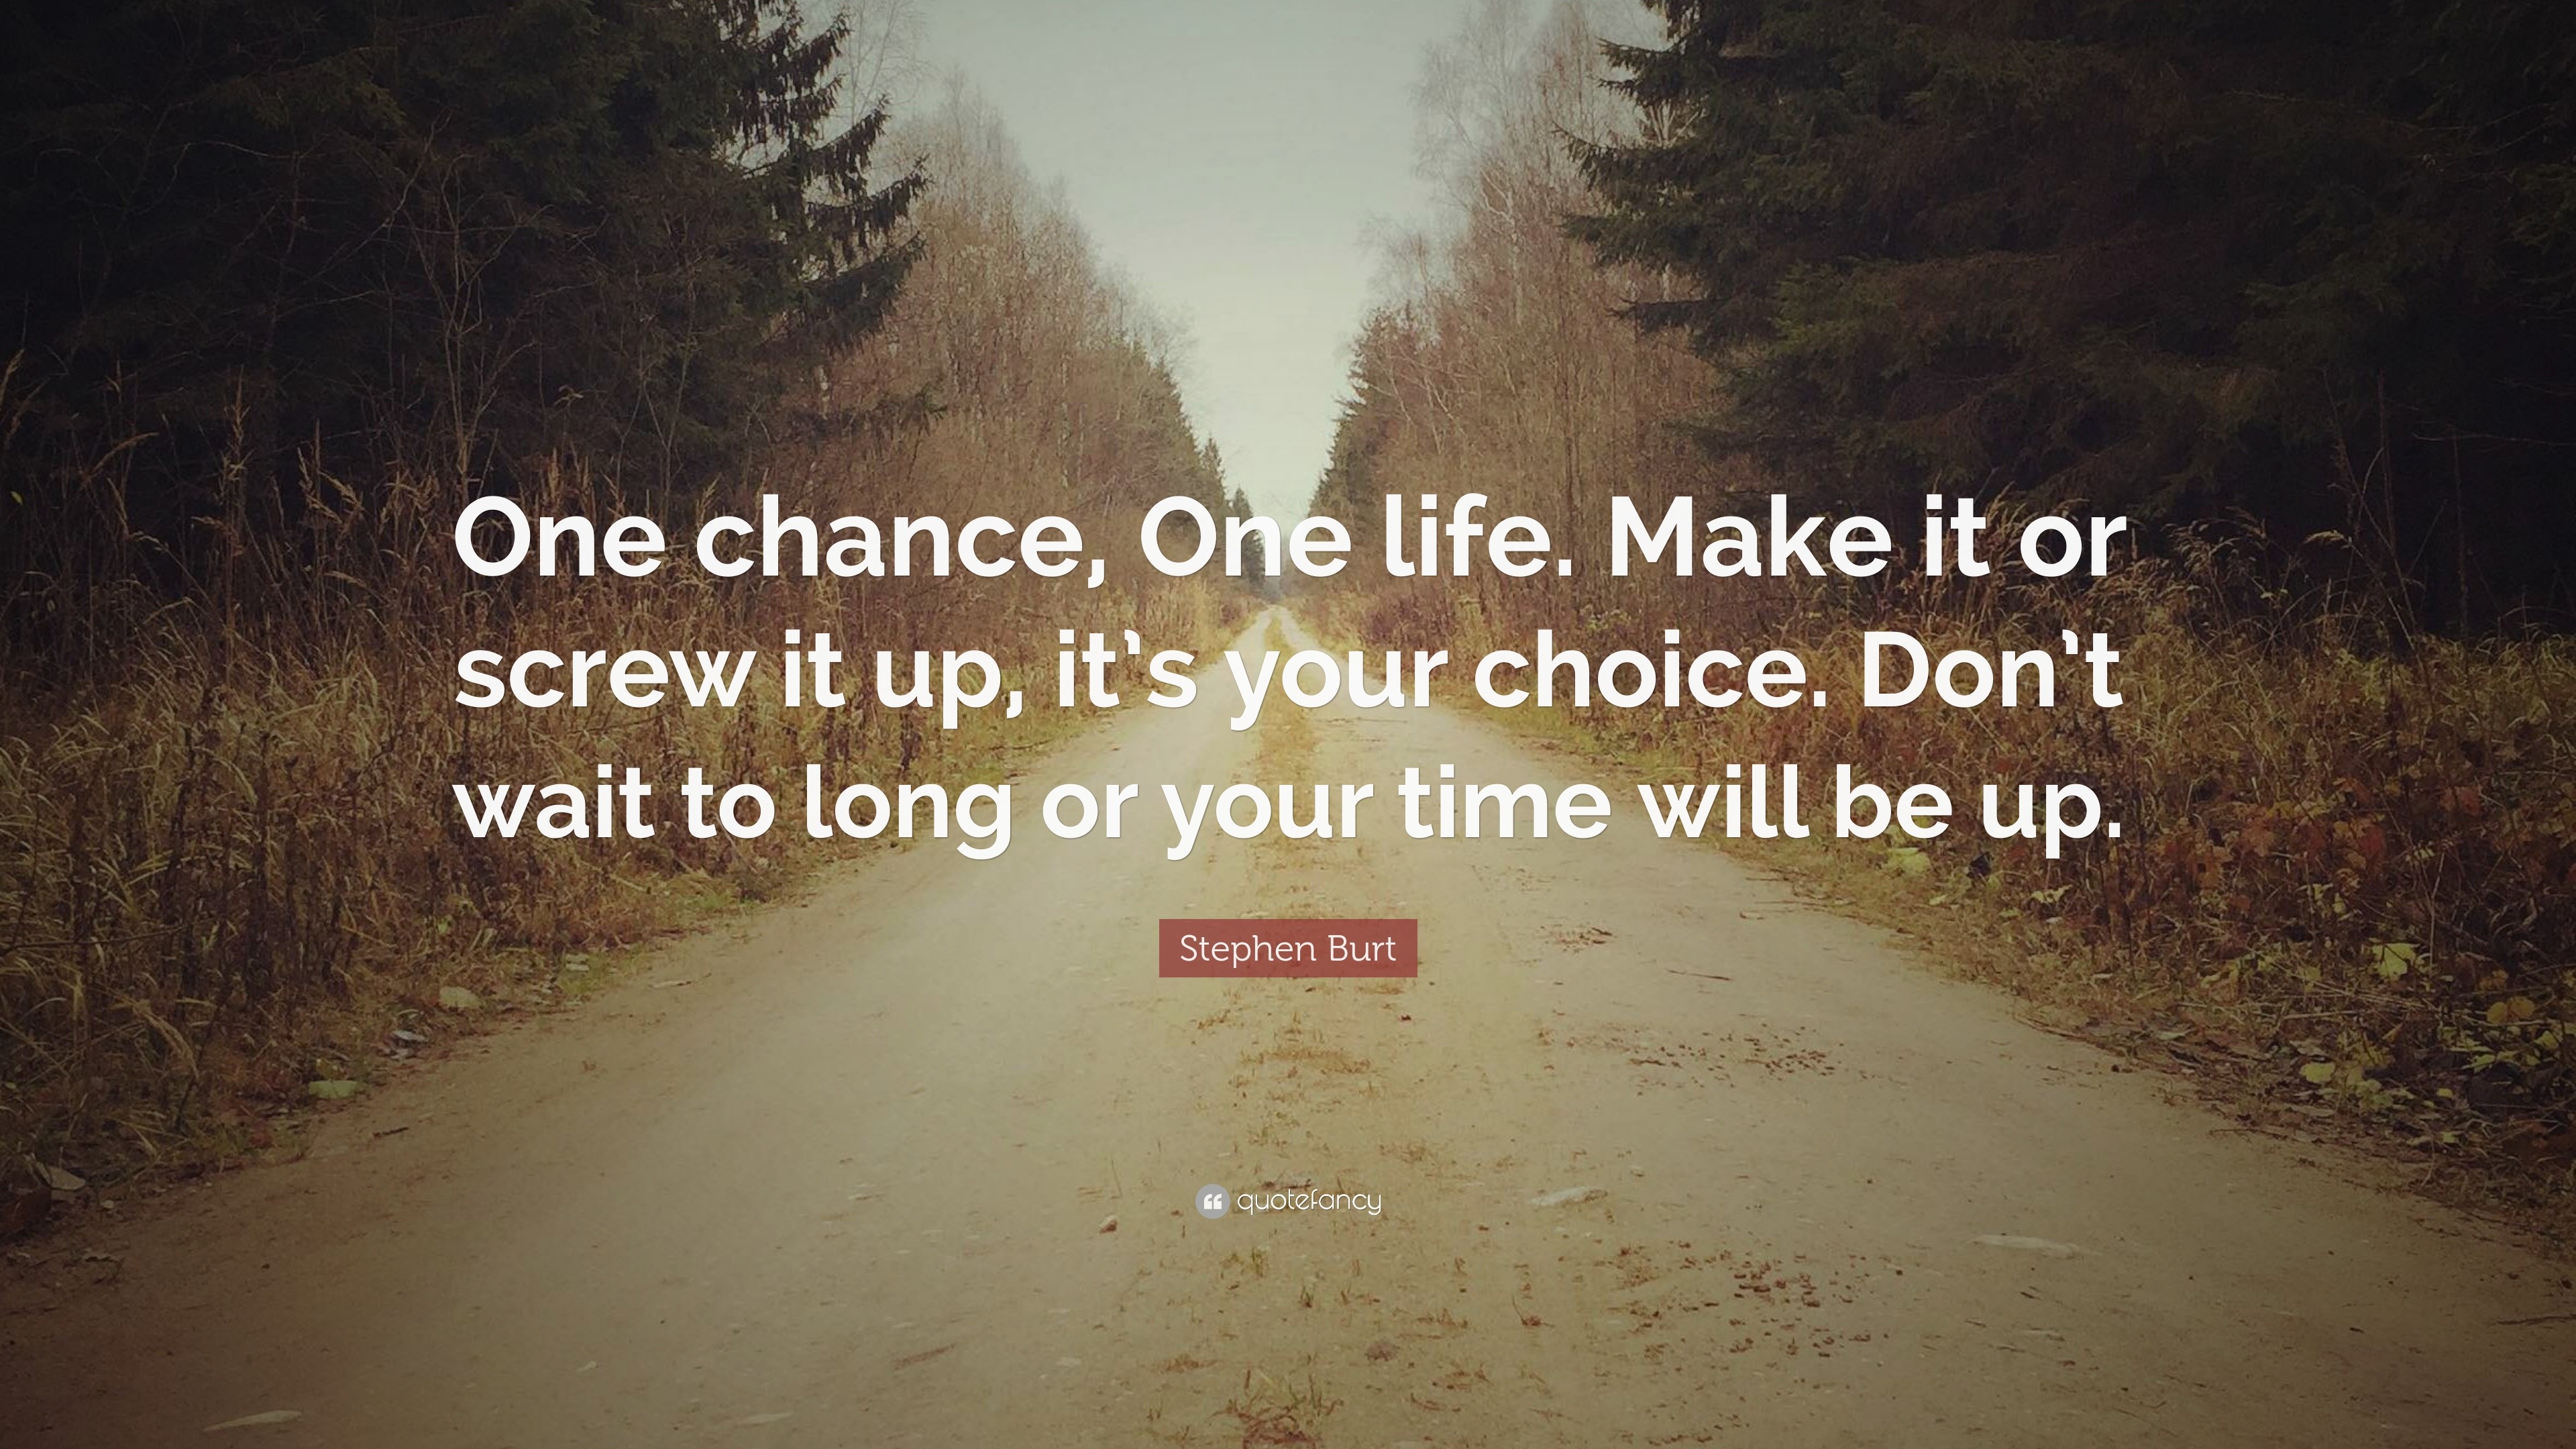 Stephen Burt Quote: “One chance, One life. Make it or screw it up, it’s ...